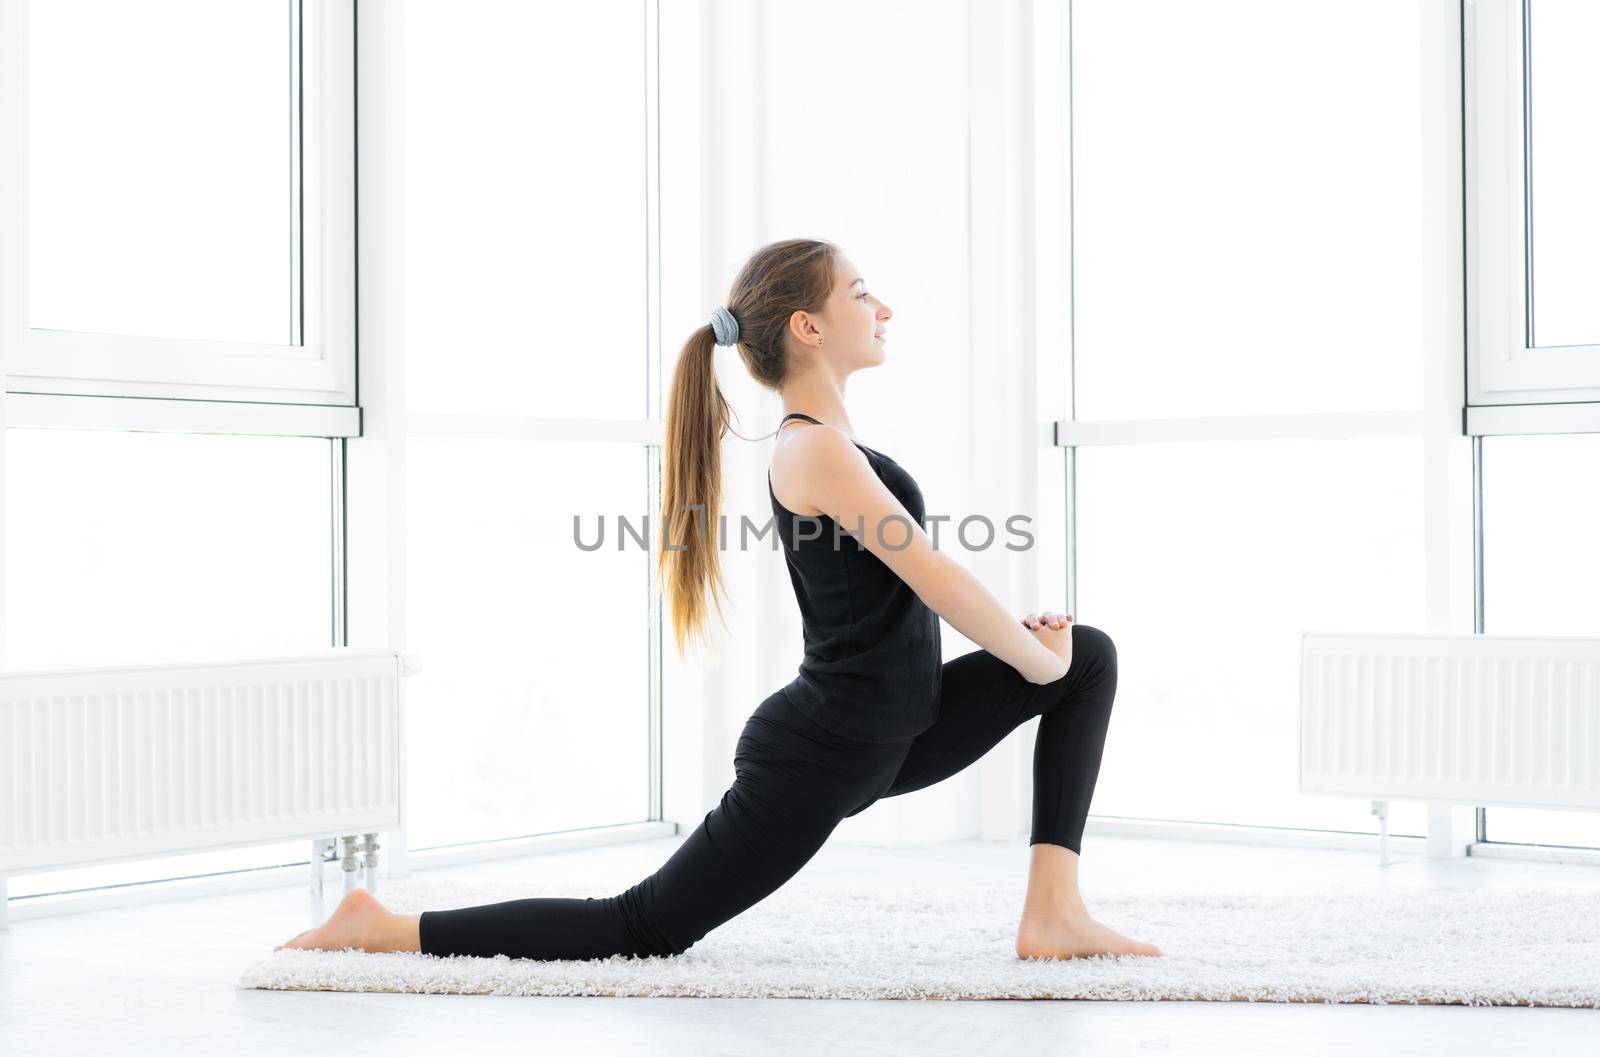 Cute girl doing lunges exercise in light room